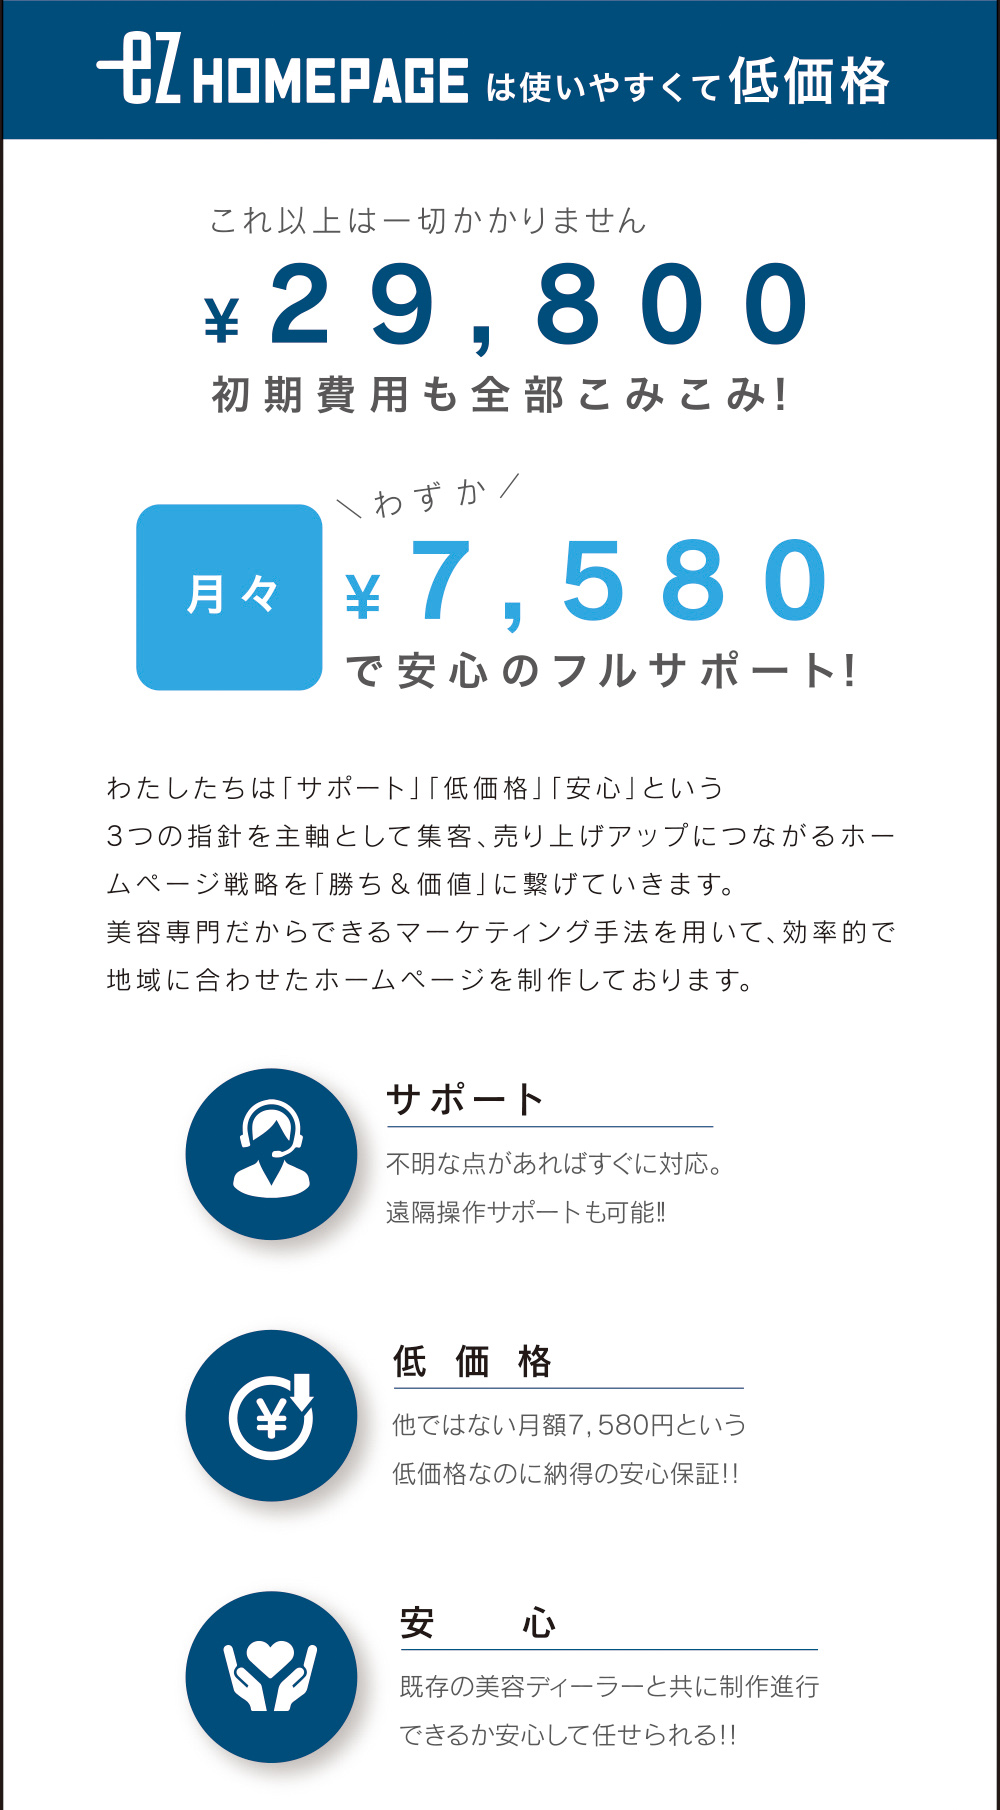 EZ Homepageは使いやすくて低価格